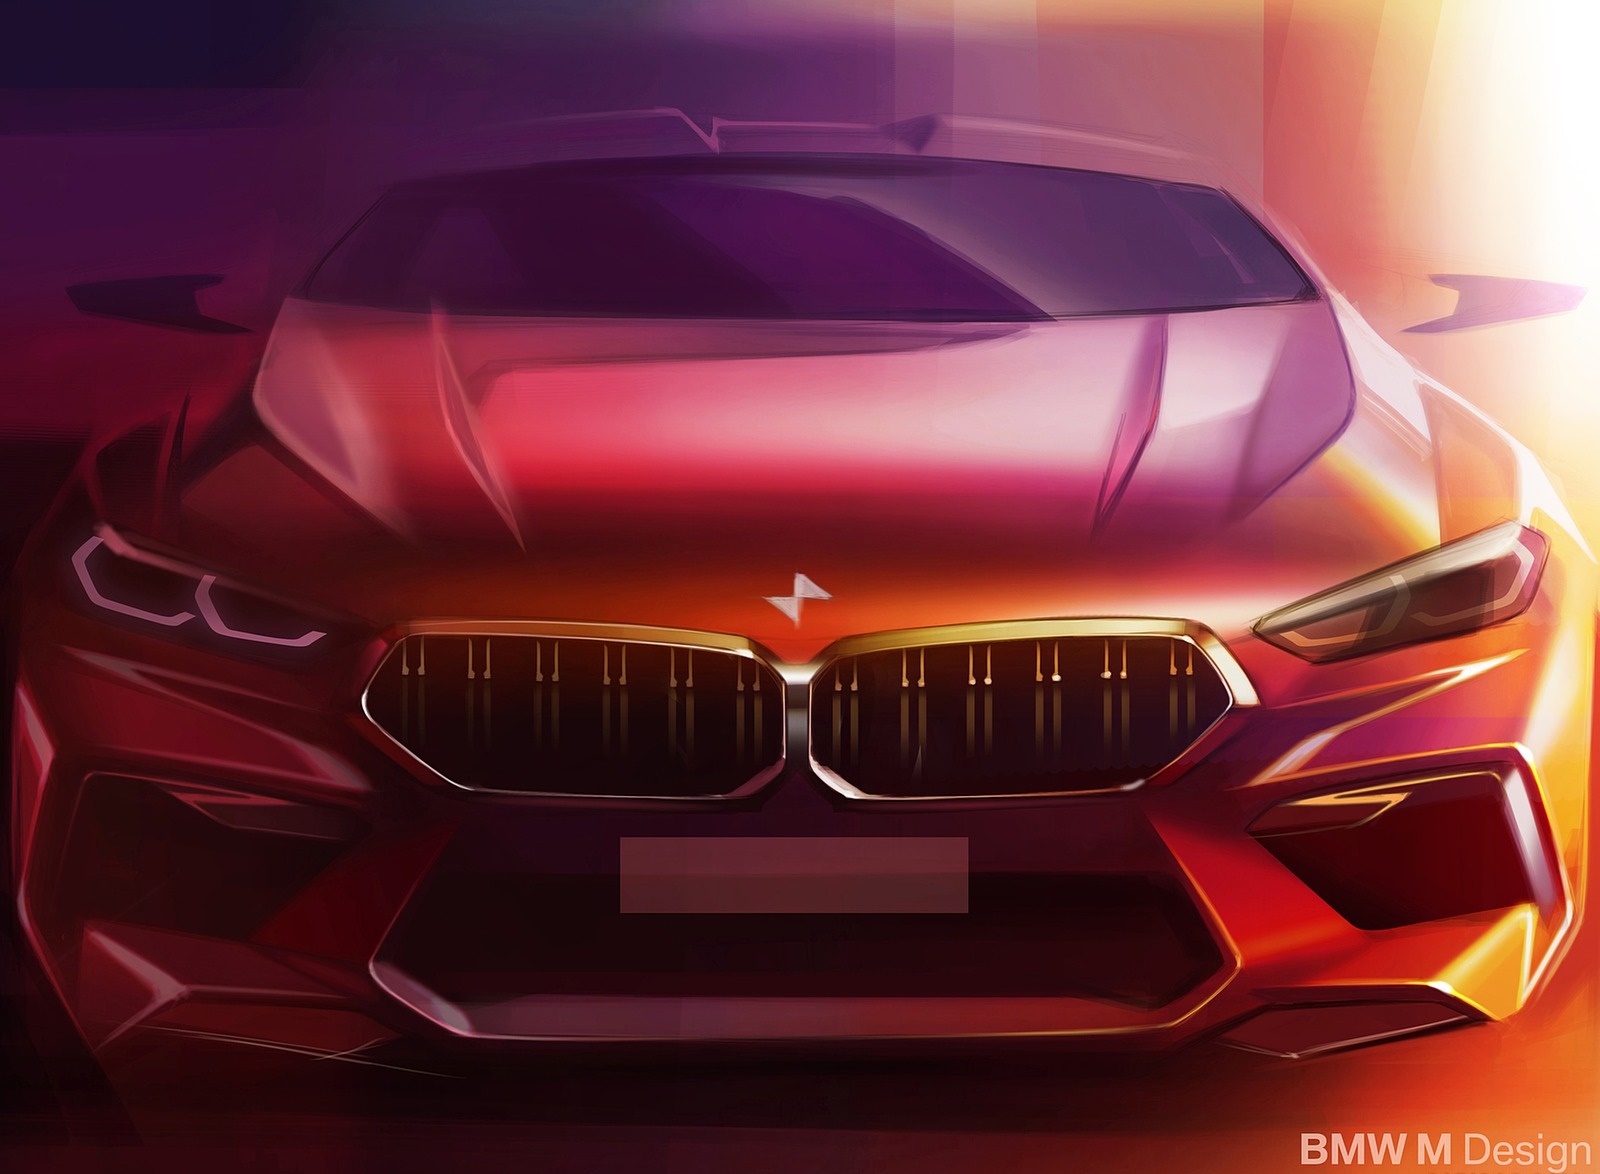 2020 BMW M8 Gran Coupe Design Sketch Wallpapers #124 of 129